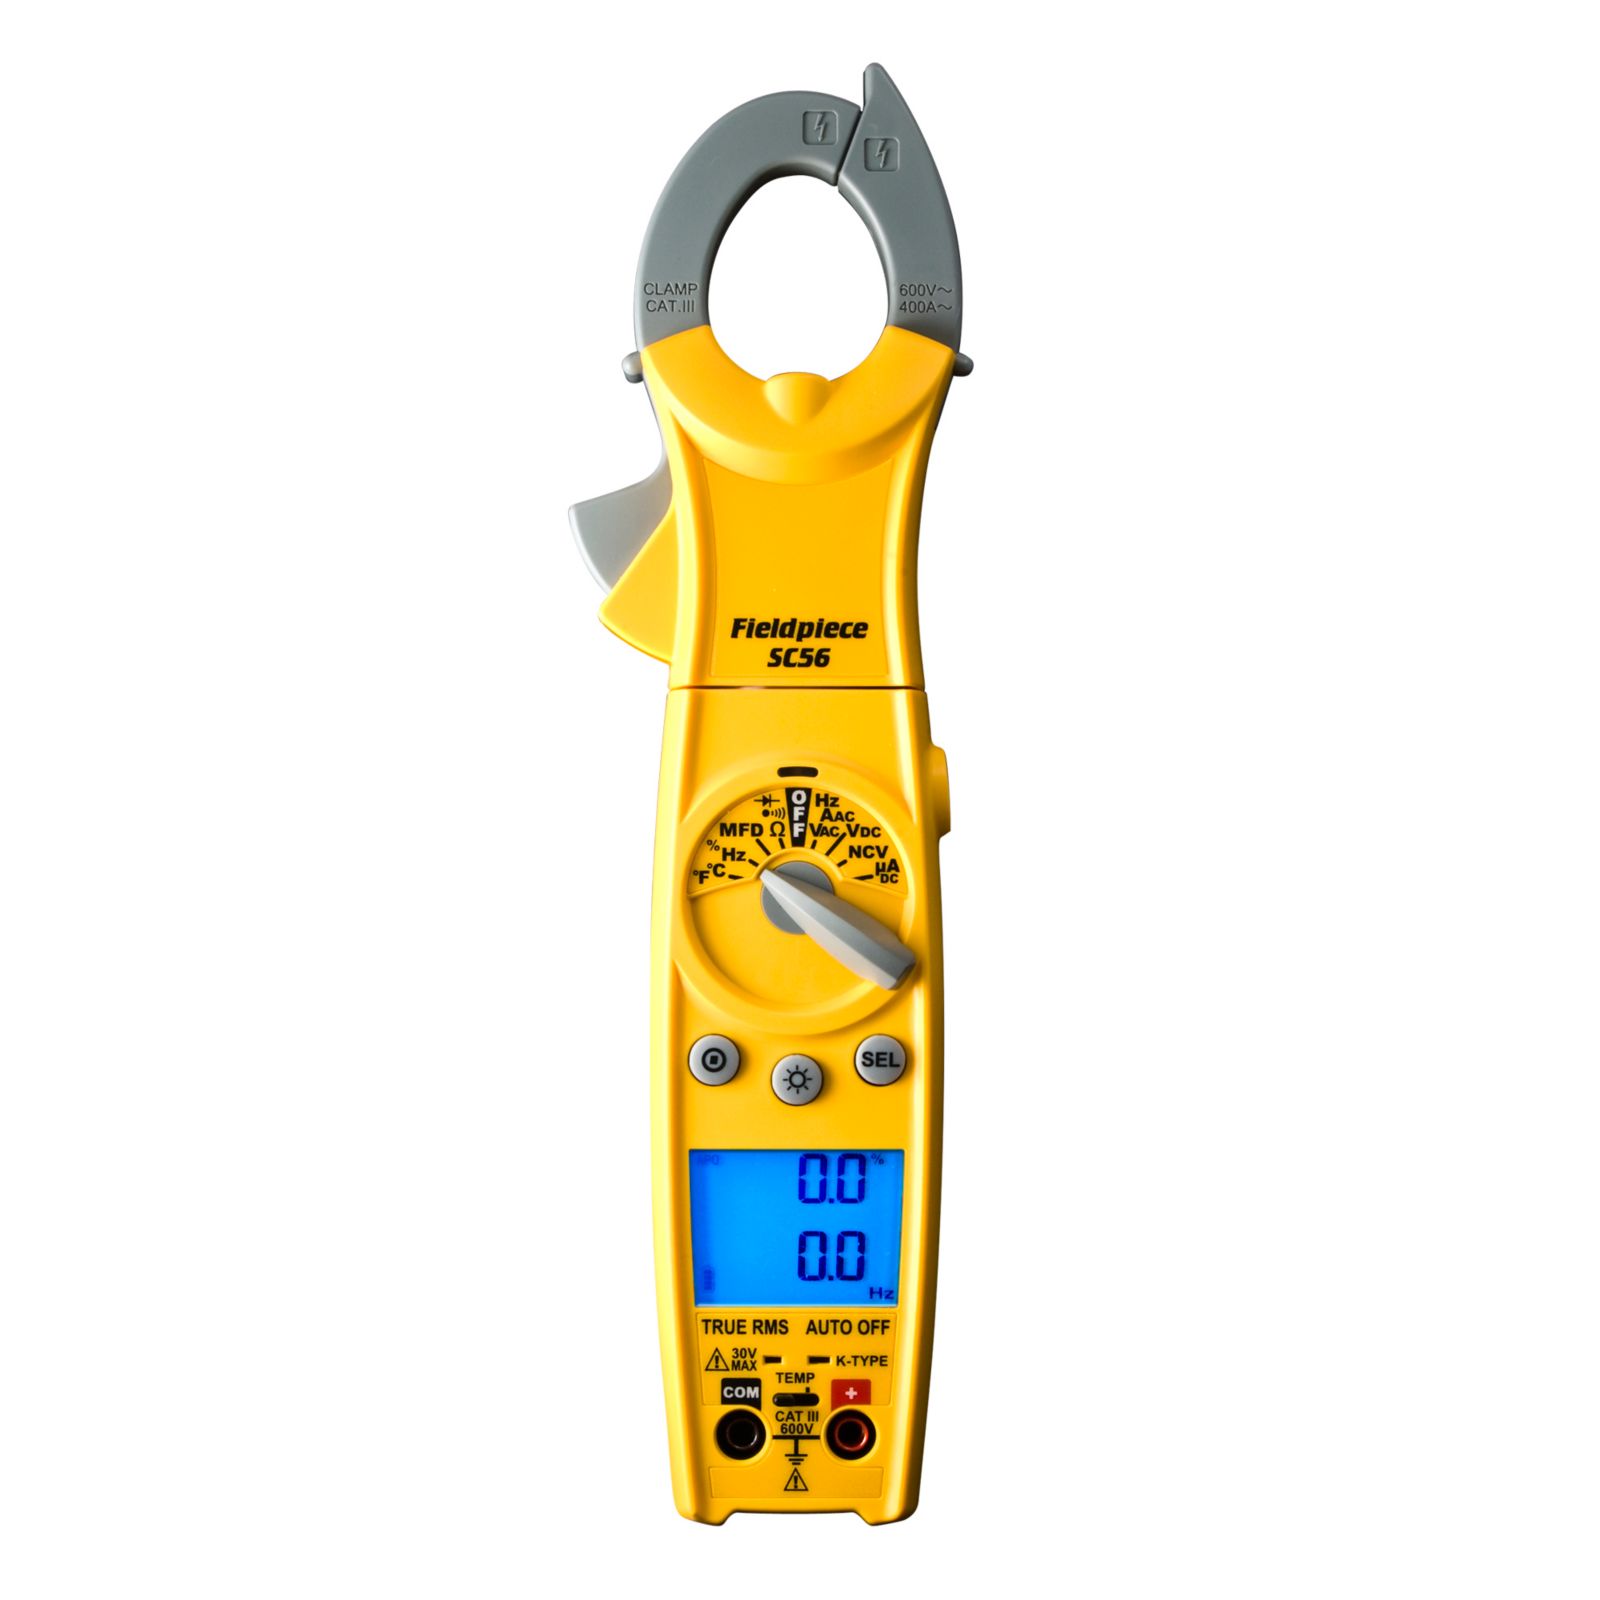 Fieldpiece SC56 - True RMS Dual Display Swivel-Head Clamp Meter With LED Flashlight